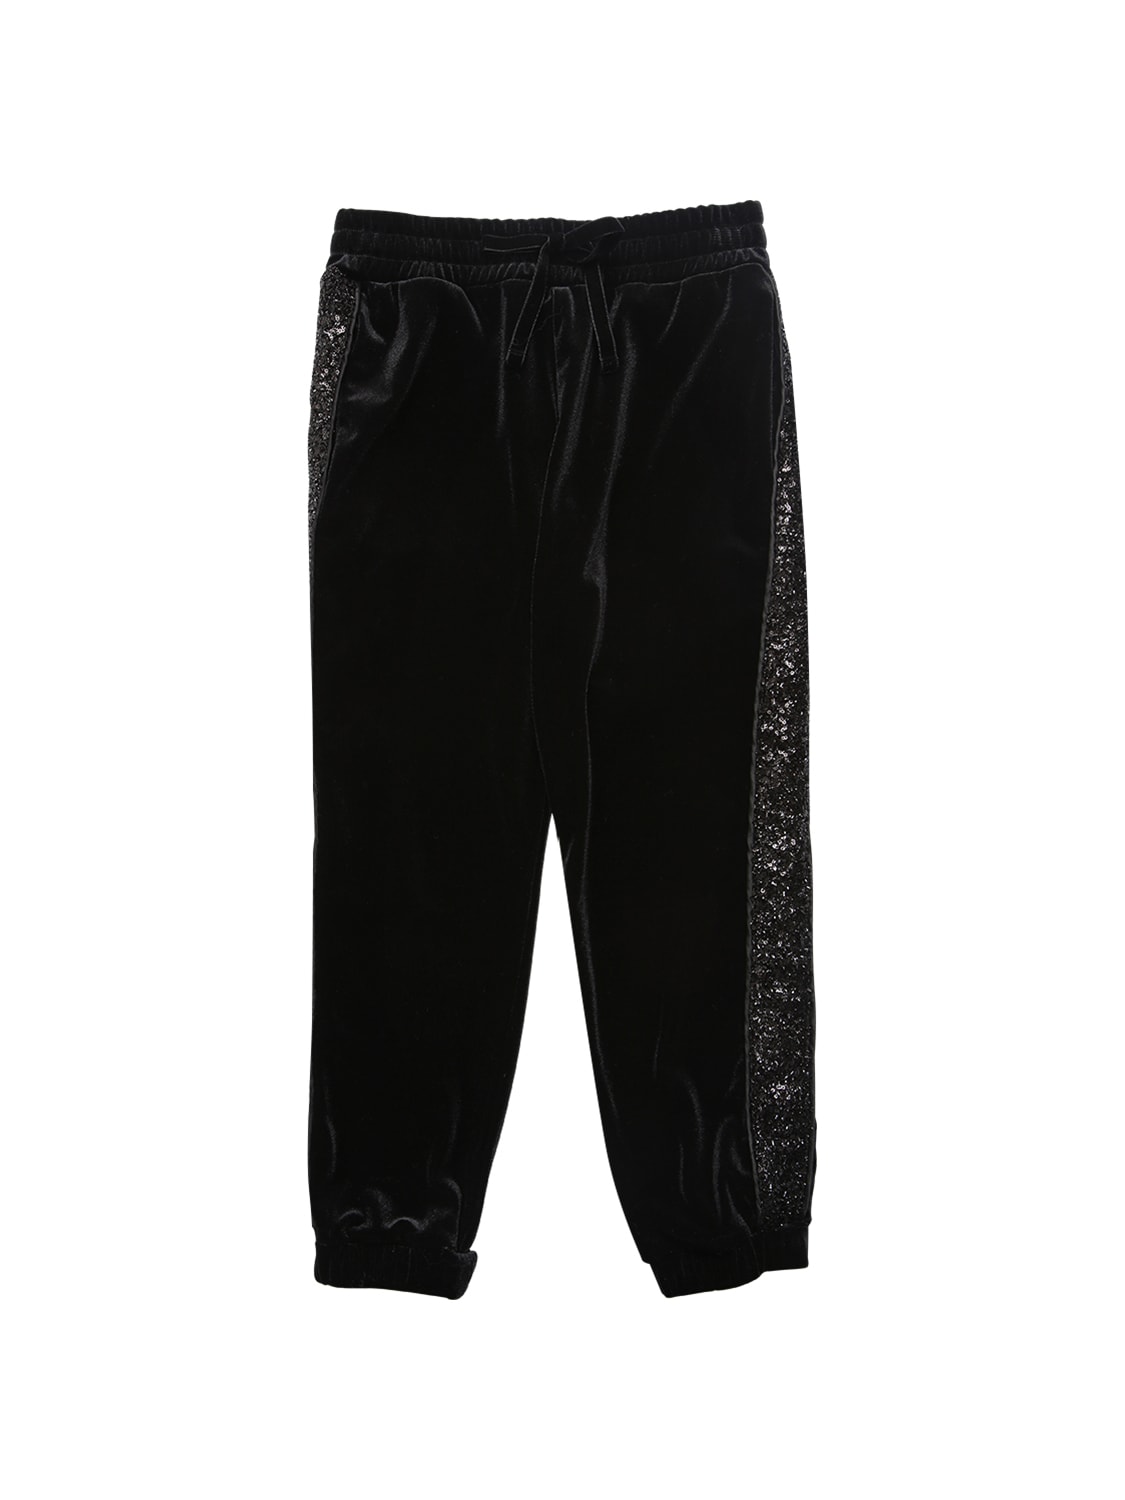 Ermanno Scervino Kids' Chenille Pants W/ Sequined Side Bands In Black